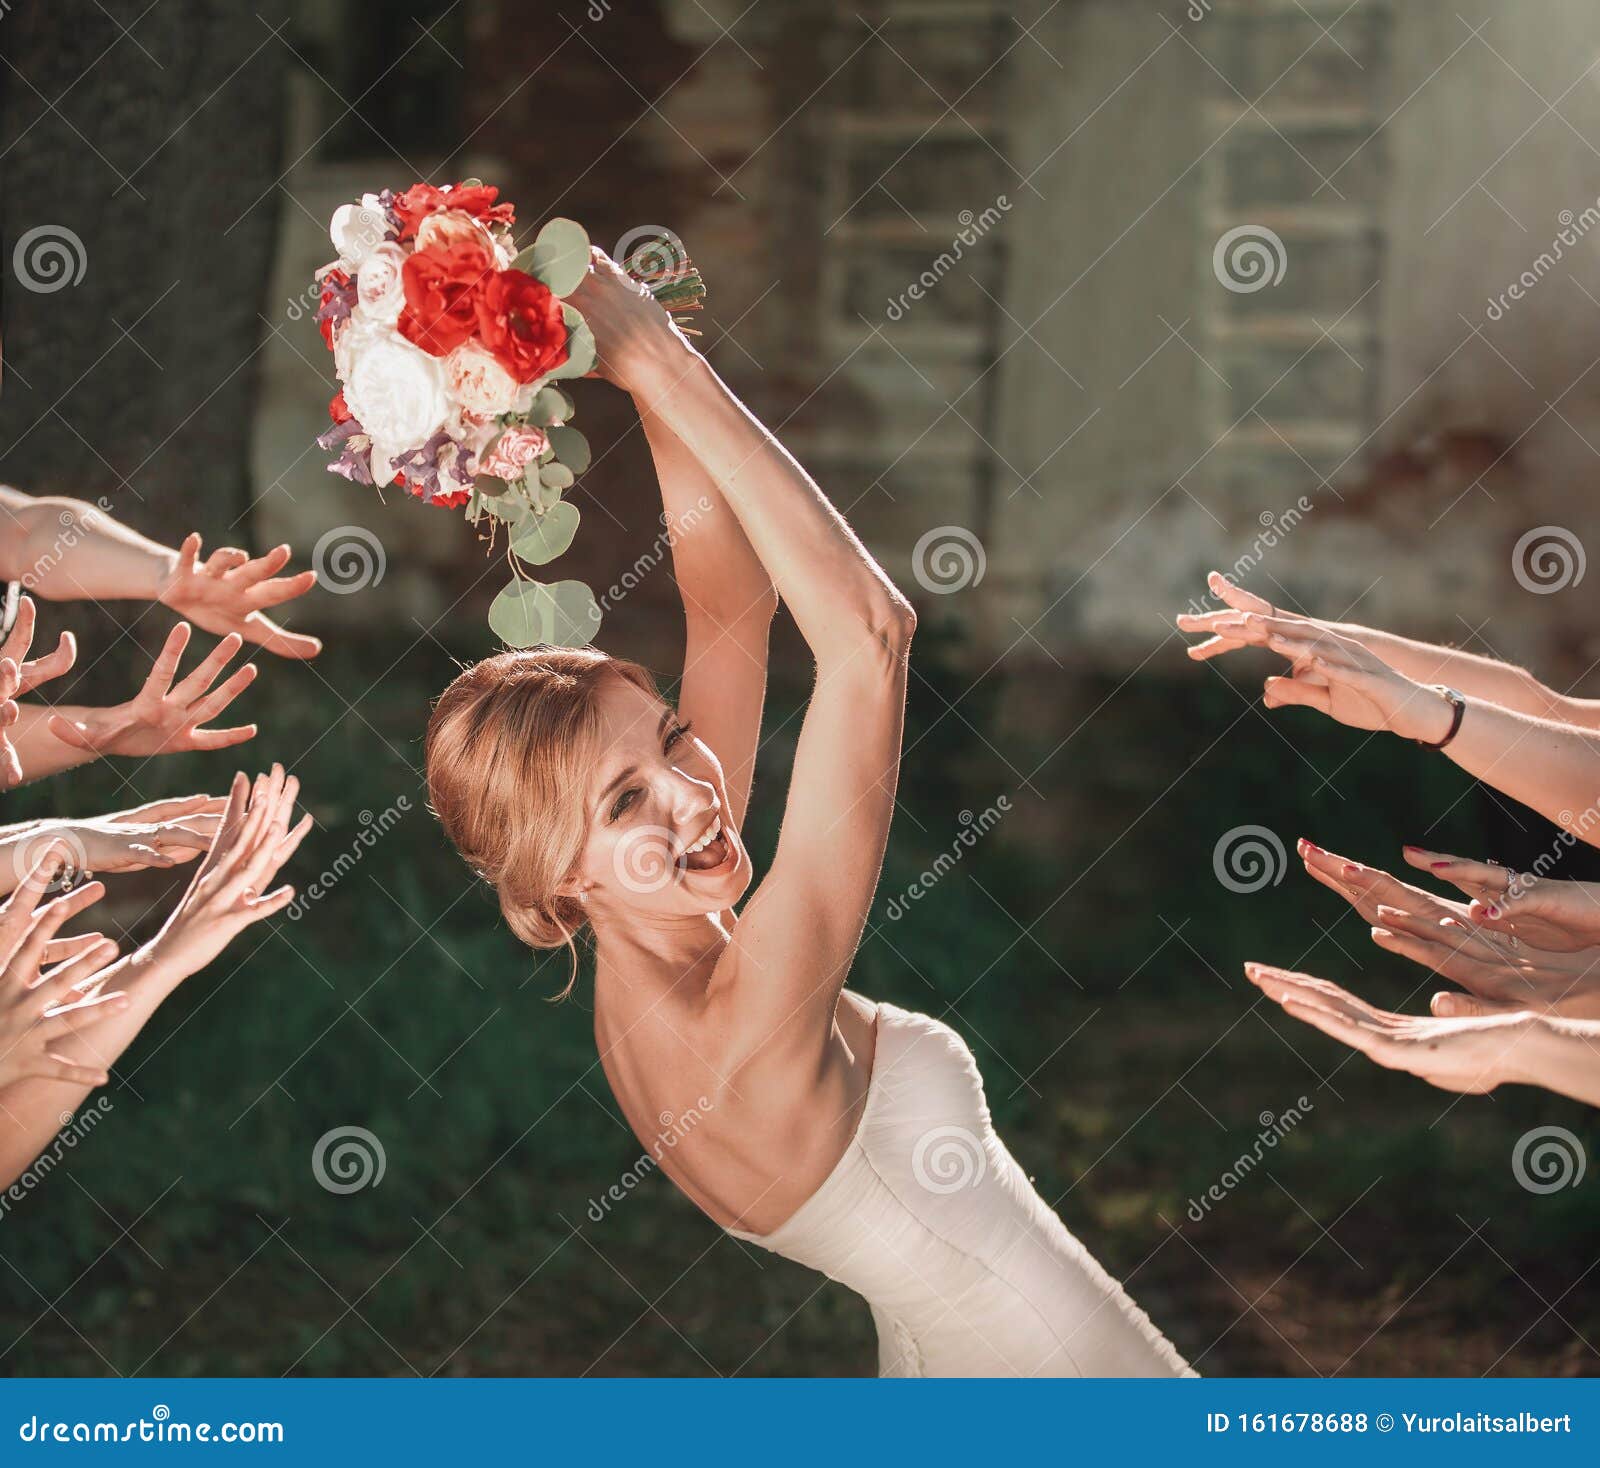 beautiful bride throws wedding bouquet to her friends